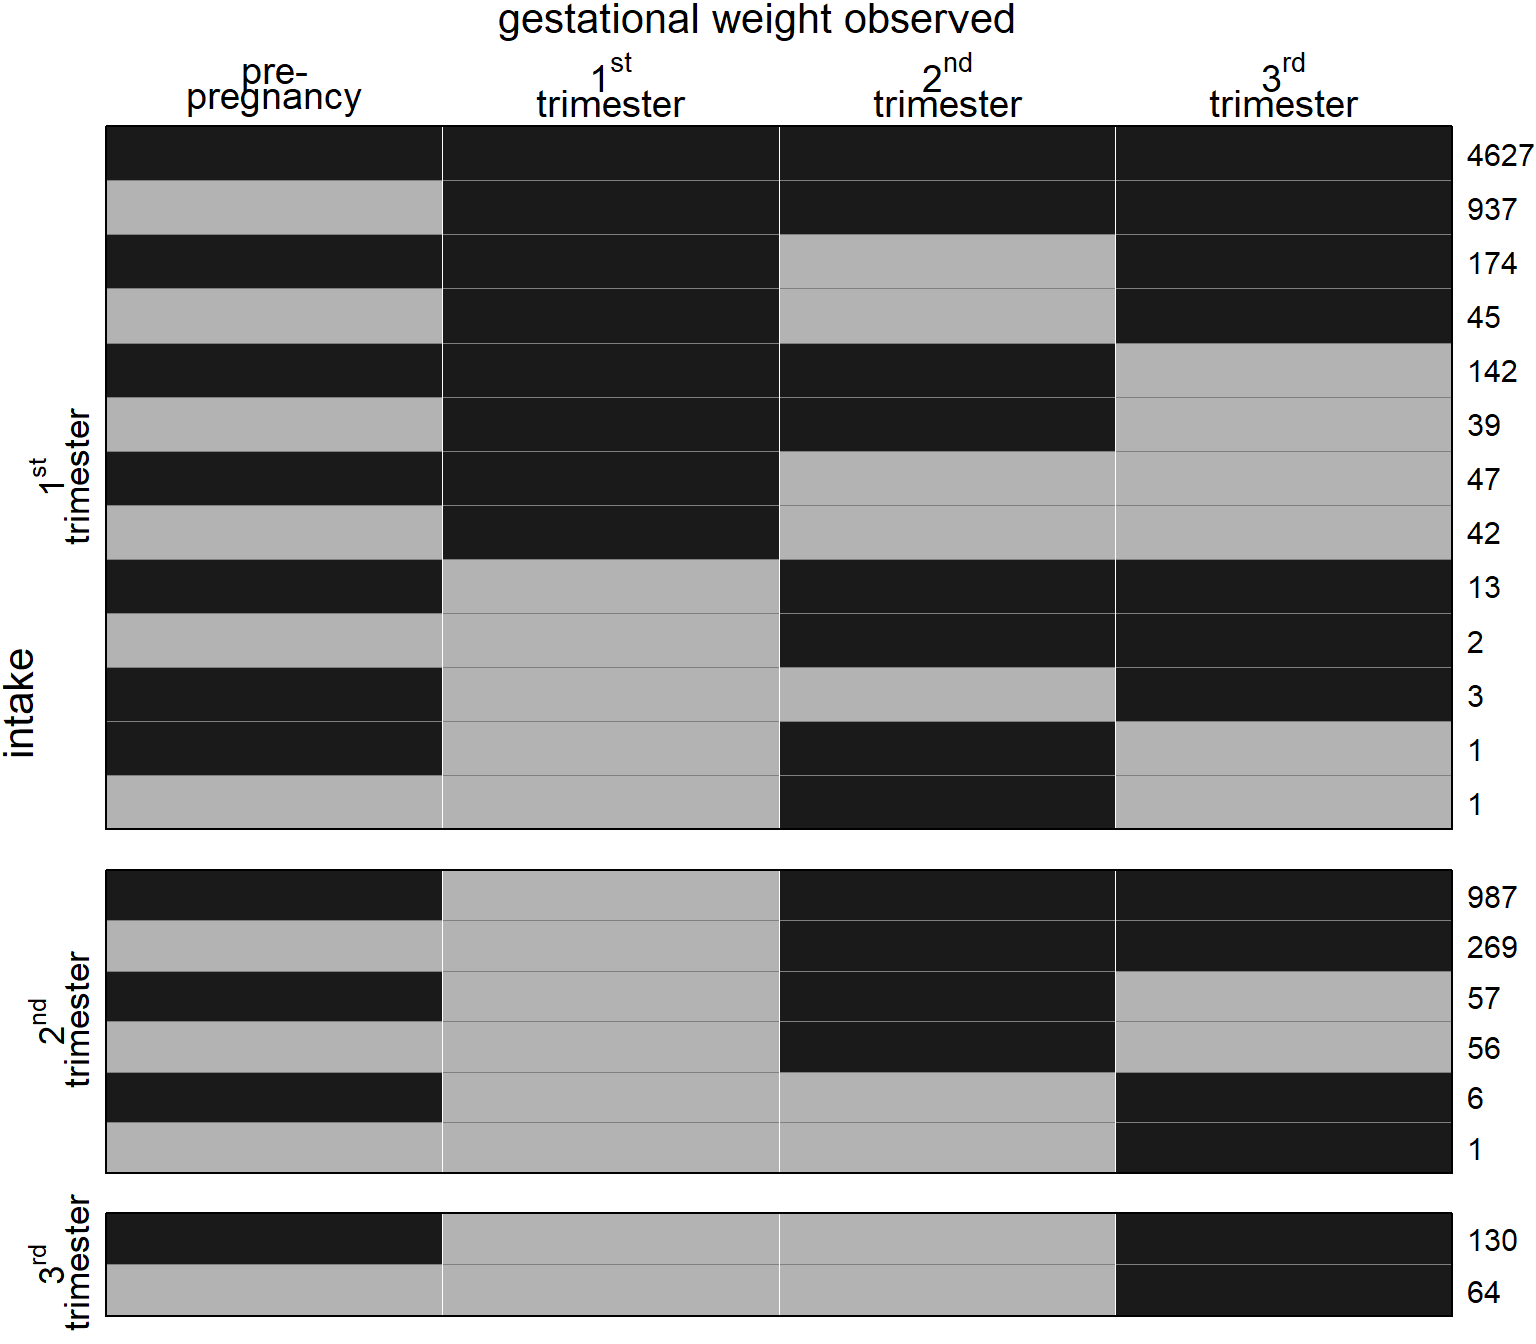 Missing data pattern for gestational weight.
Dark color depicts observed values, light color missing values.
The frequency of each missing data pattern is given on the right.